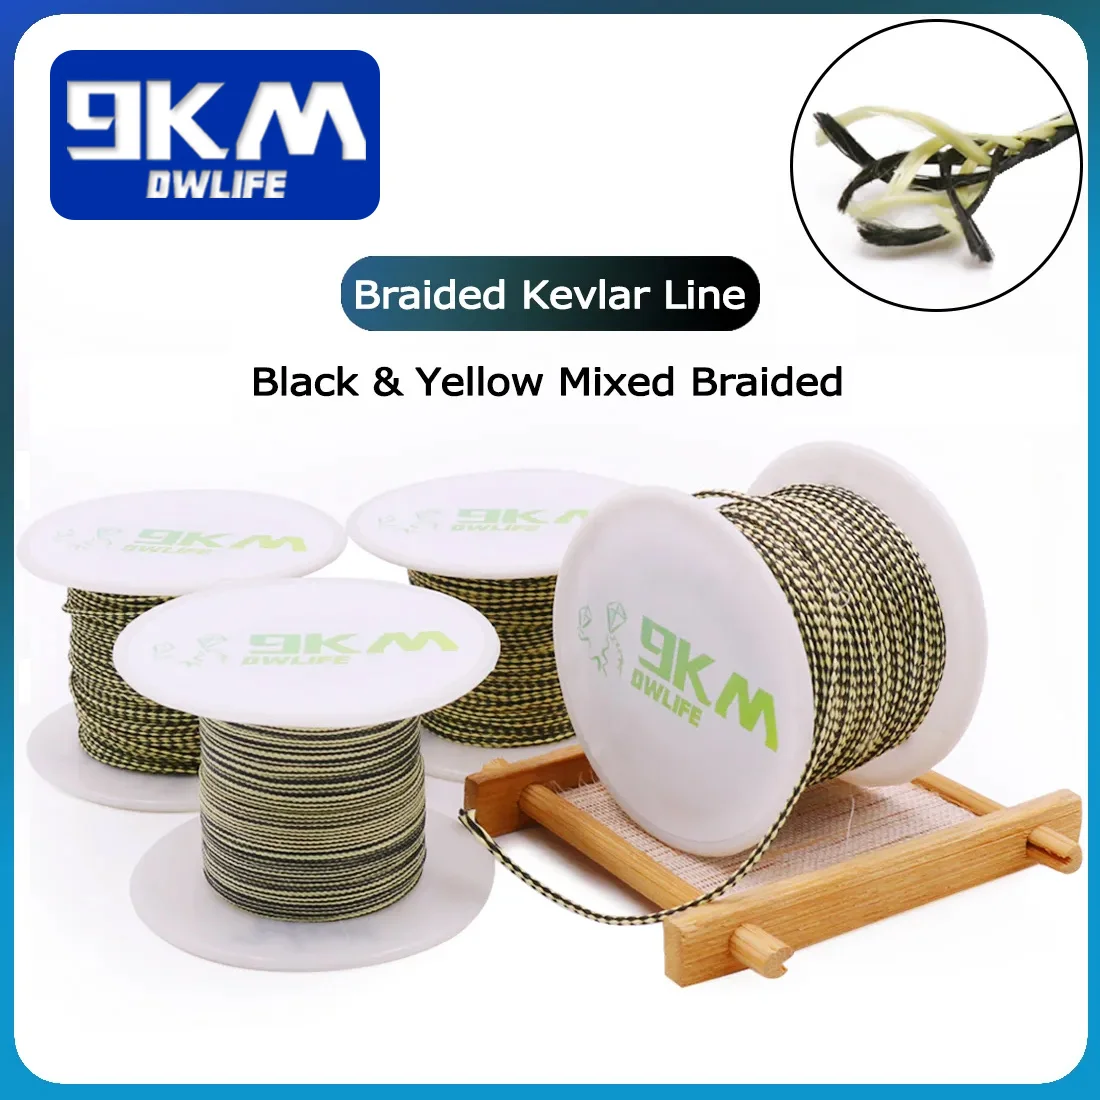 https://ae01.alicdn.com/kf/Sb0552760a39b433aaa37c9f4cb5e67adS/Kevlar-Line-Braided-Fishing-Line-50-500ft-Kite-Flying-String-Outdoor-High-Strength-Camping-Hiking-Backpacking.jpg